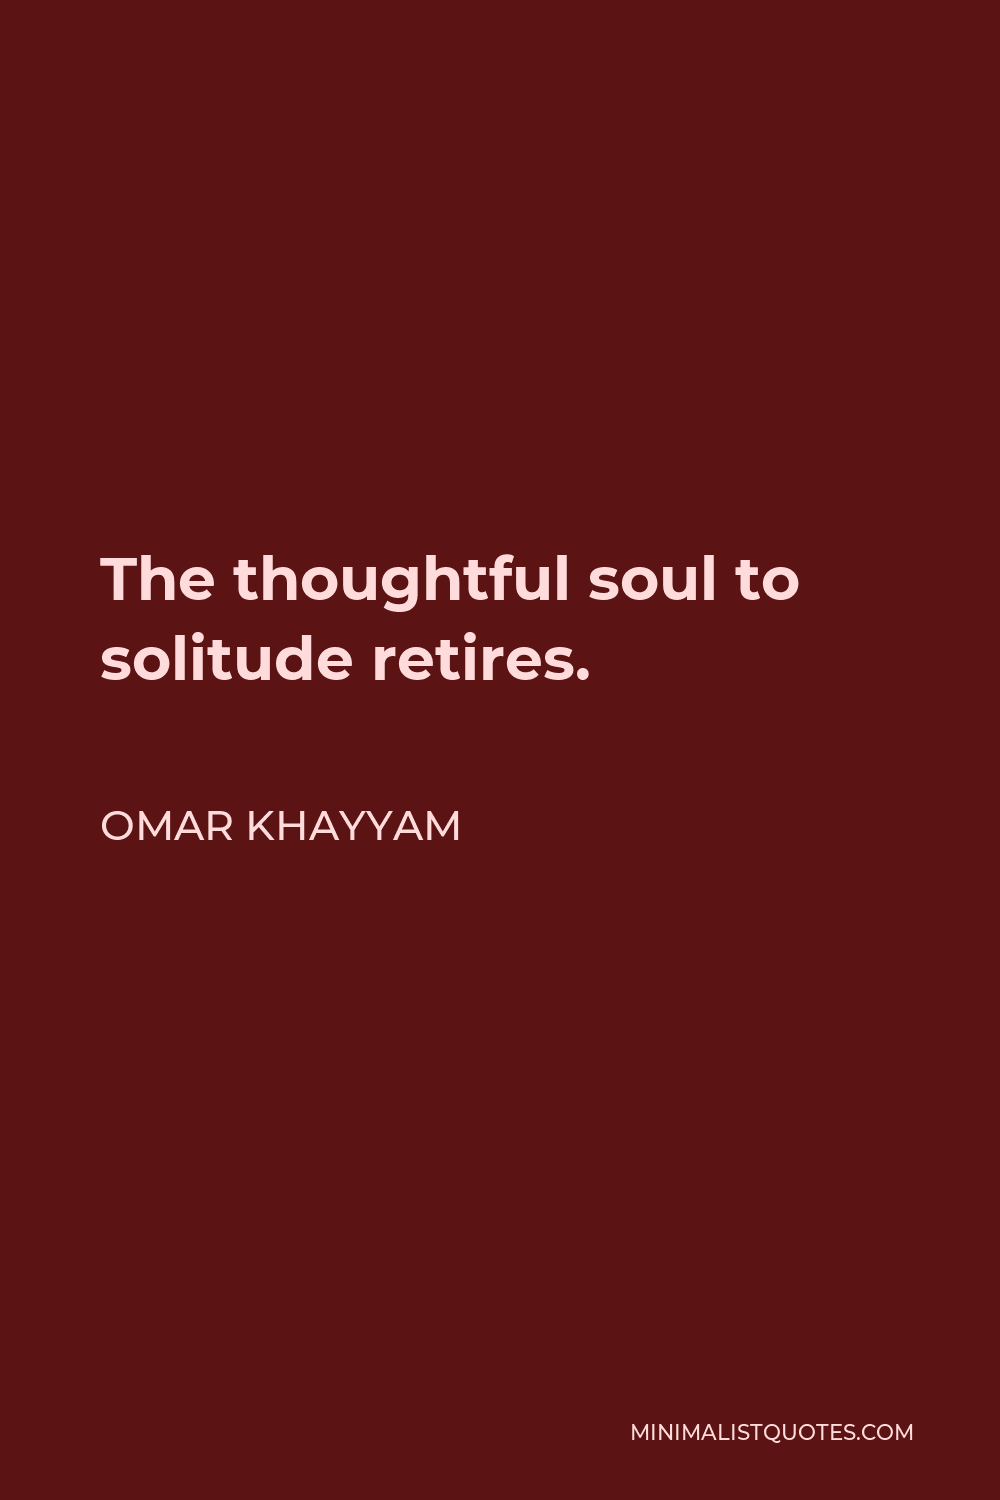 Omar Khayyam Quote - The thoughtful soul to solitude retires.